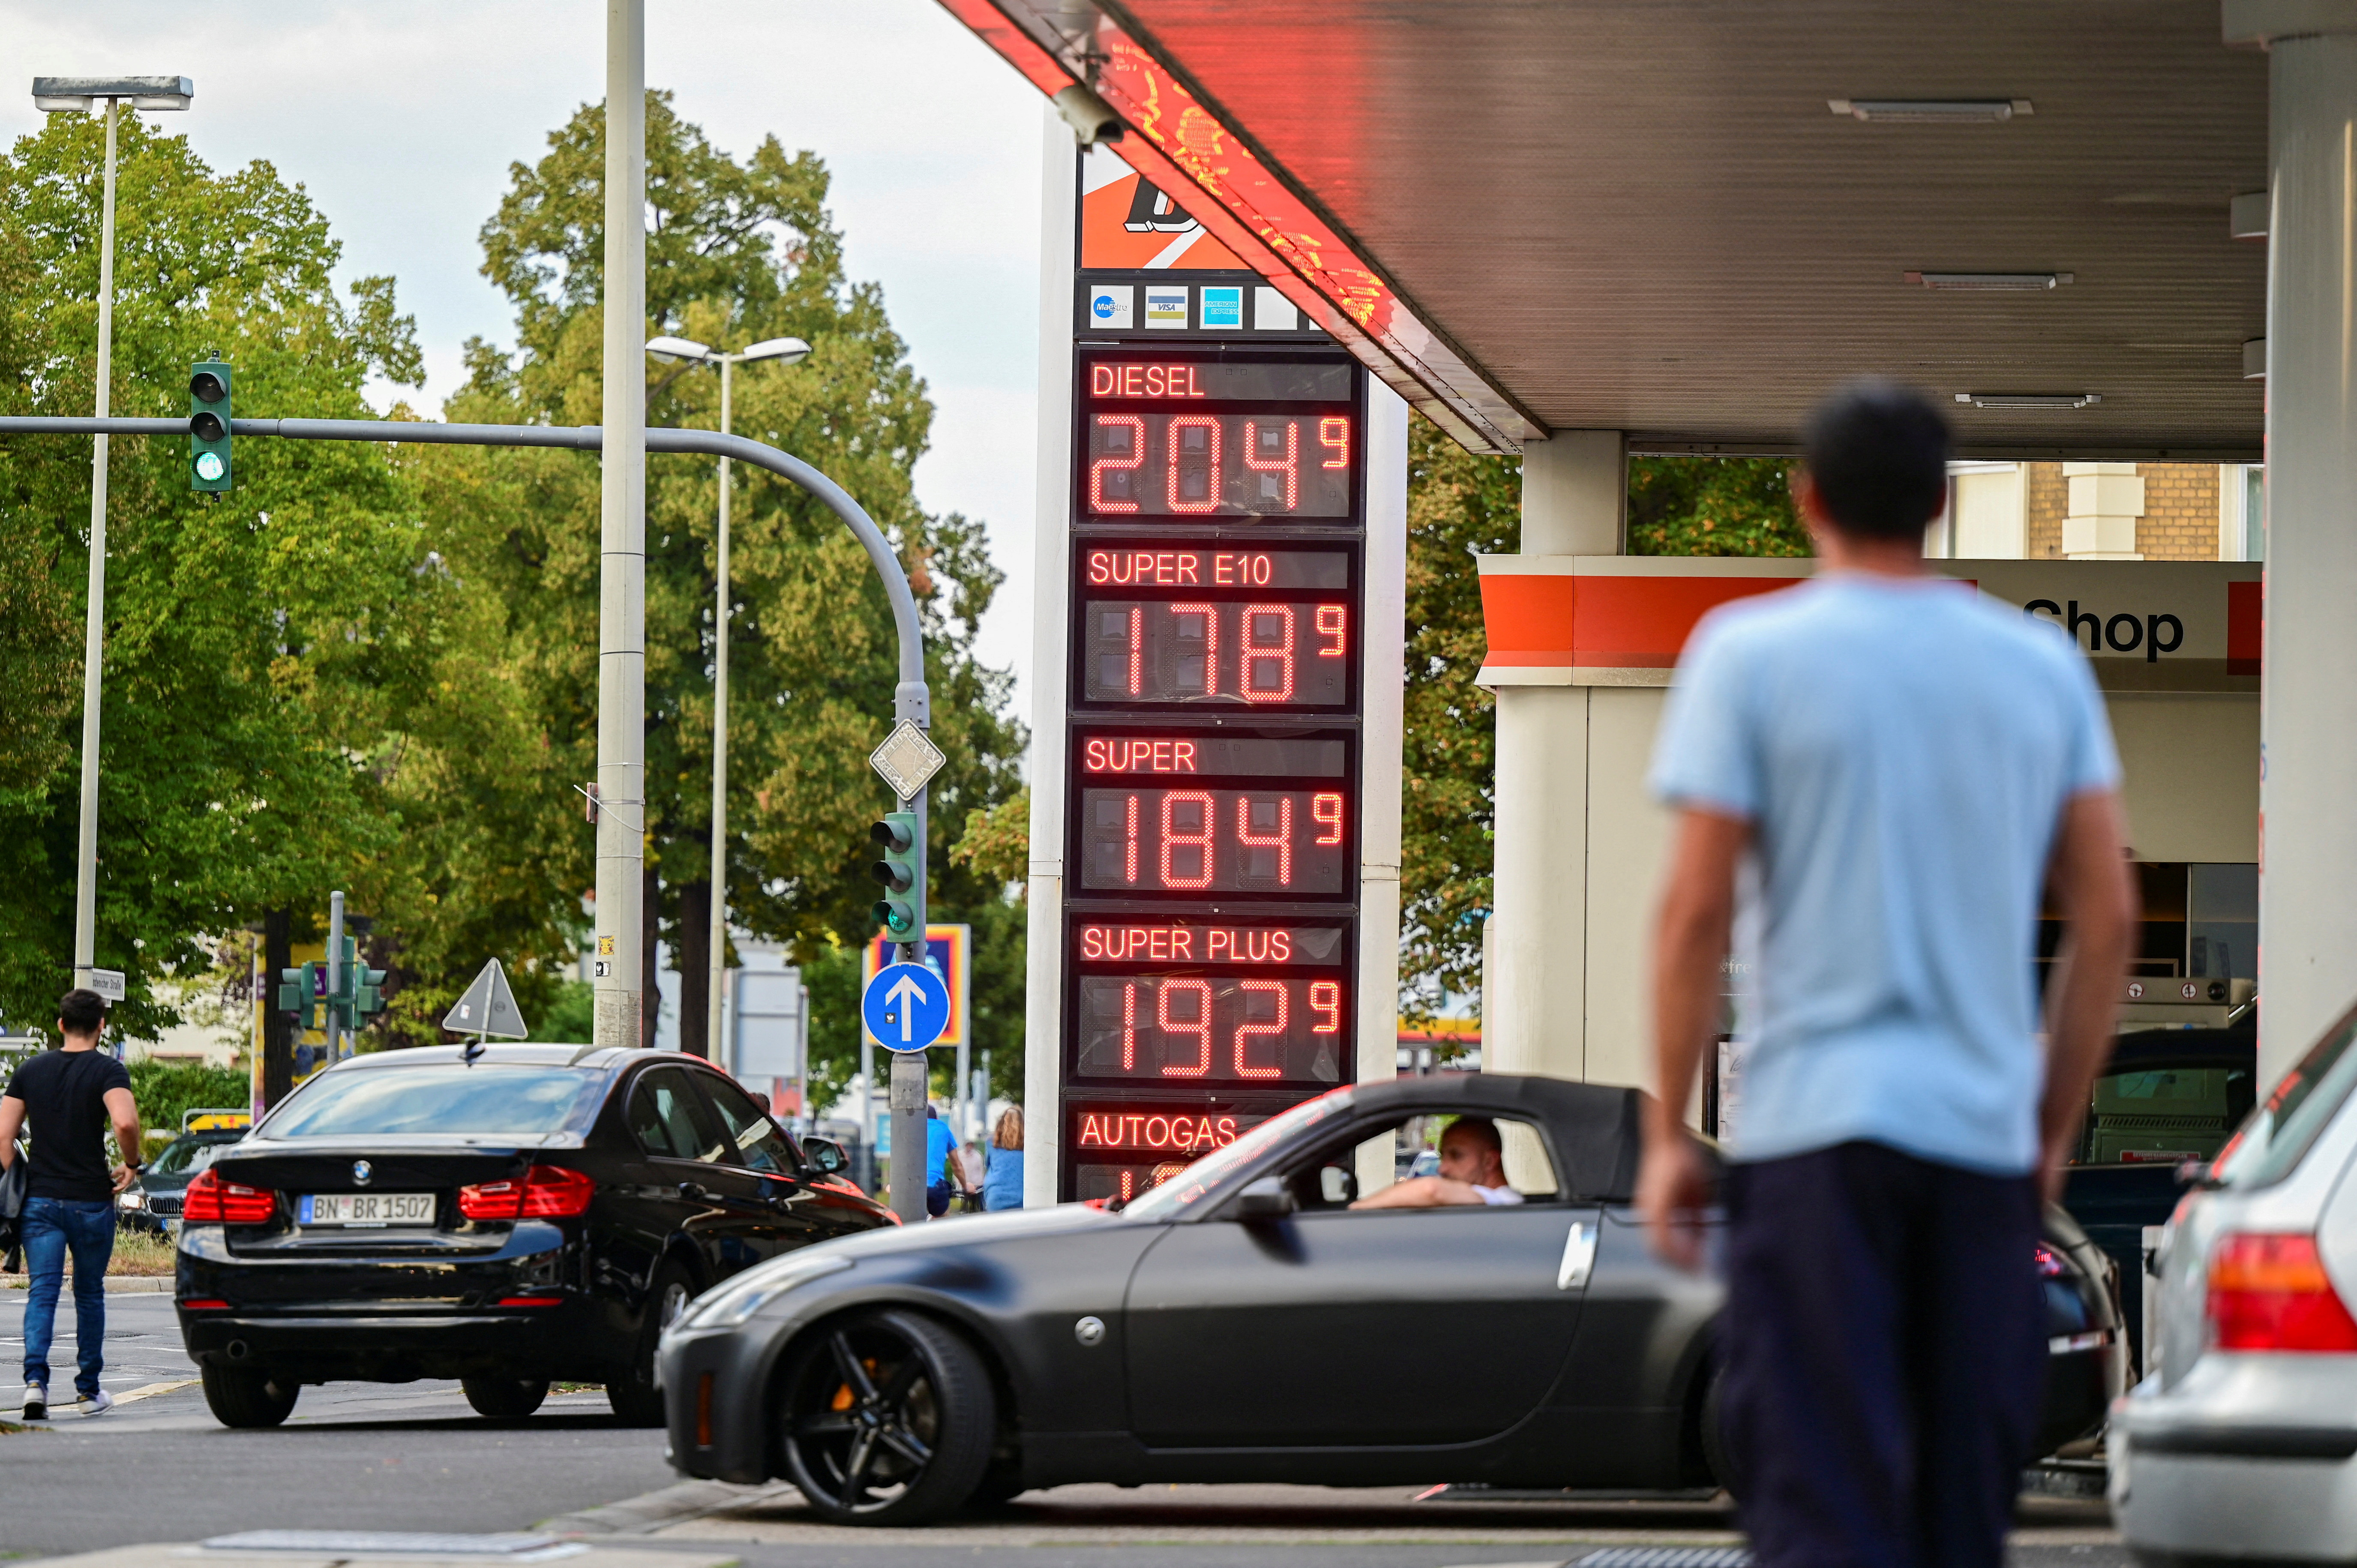 Petrol prices are displayed at a bft petrol station in Bonn, Germany,